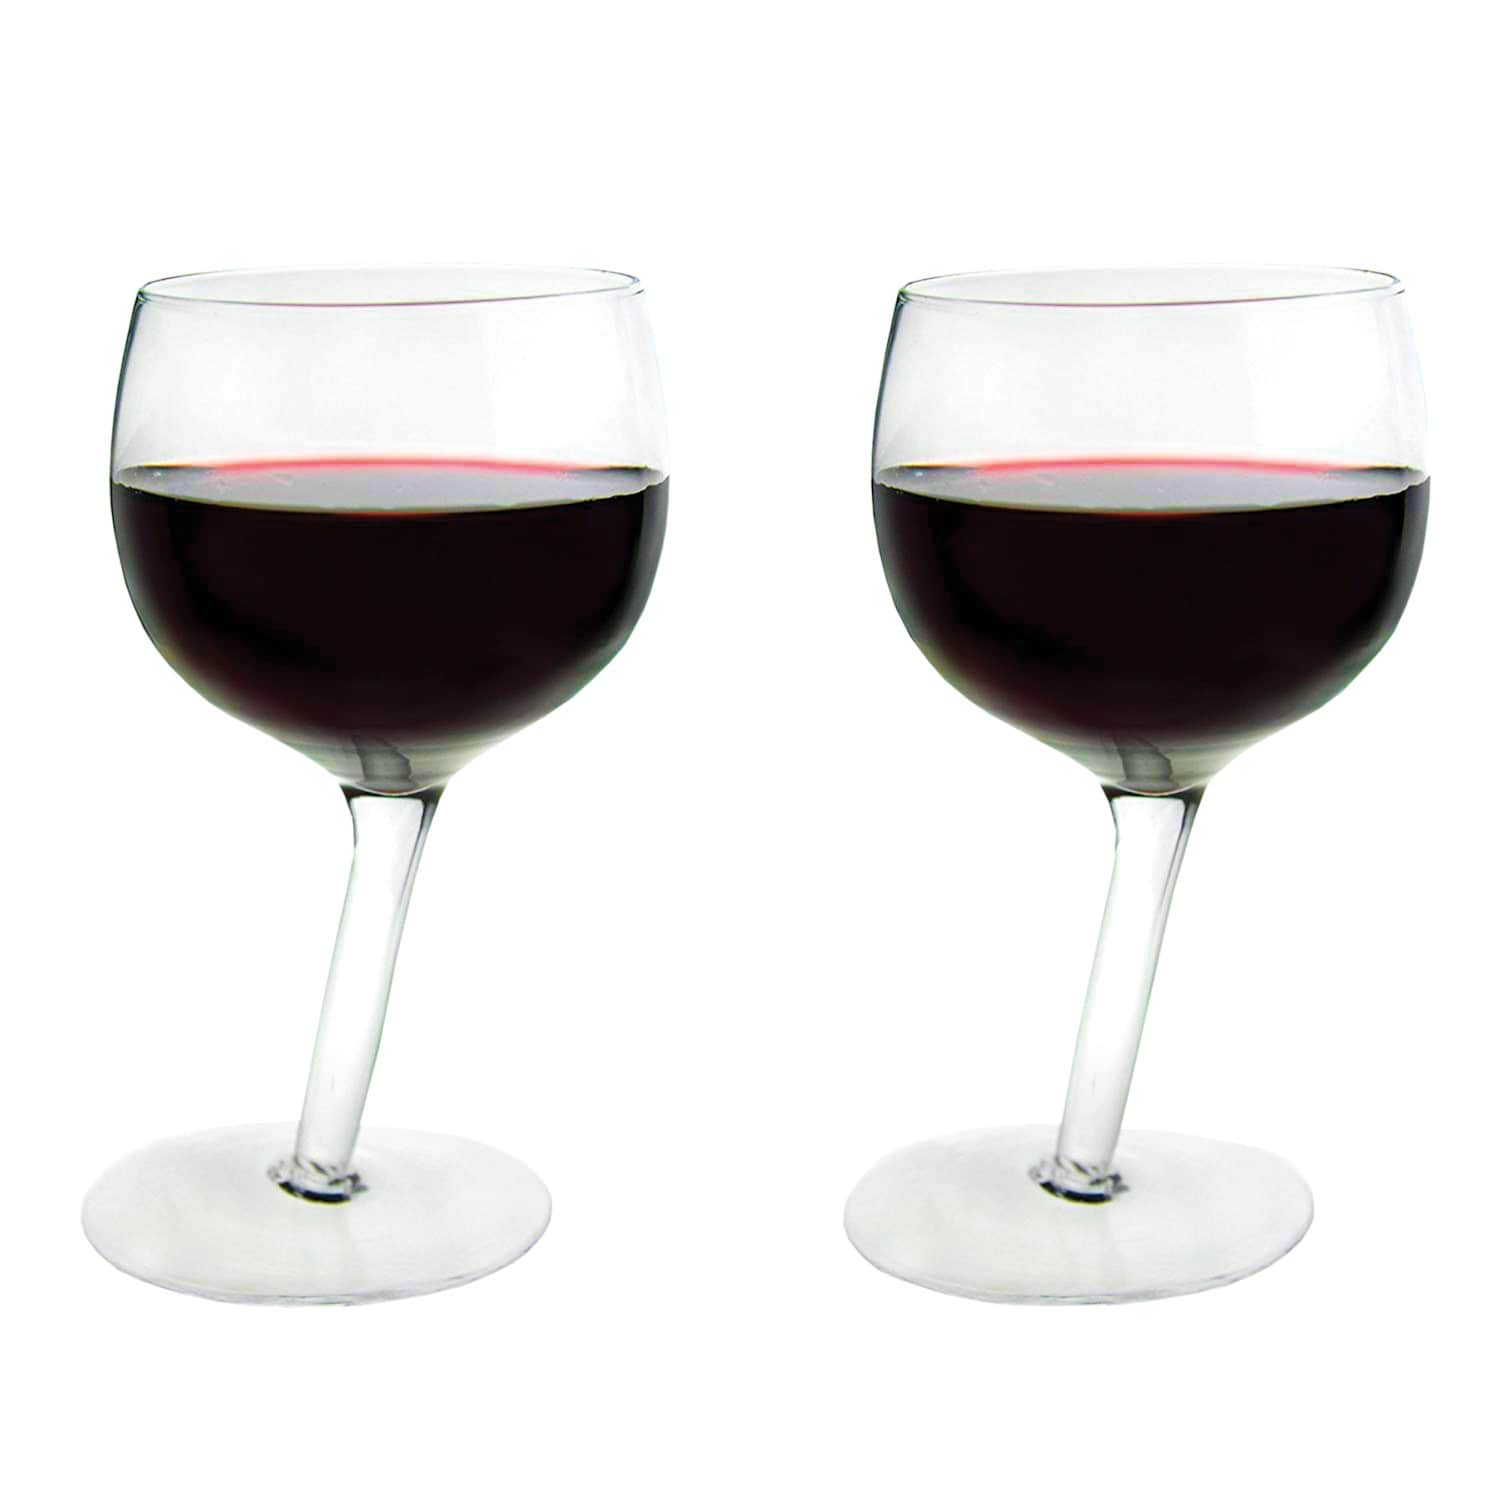 Bespoke Tipsy Slanted Stem Wine Glass Set - Each Holds 5 Ounces - Clear - 7  in. x 3.25 in. - Bed Bath & Beyond - 28181940